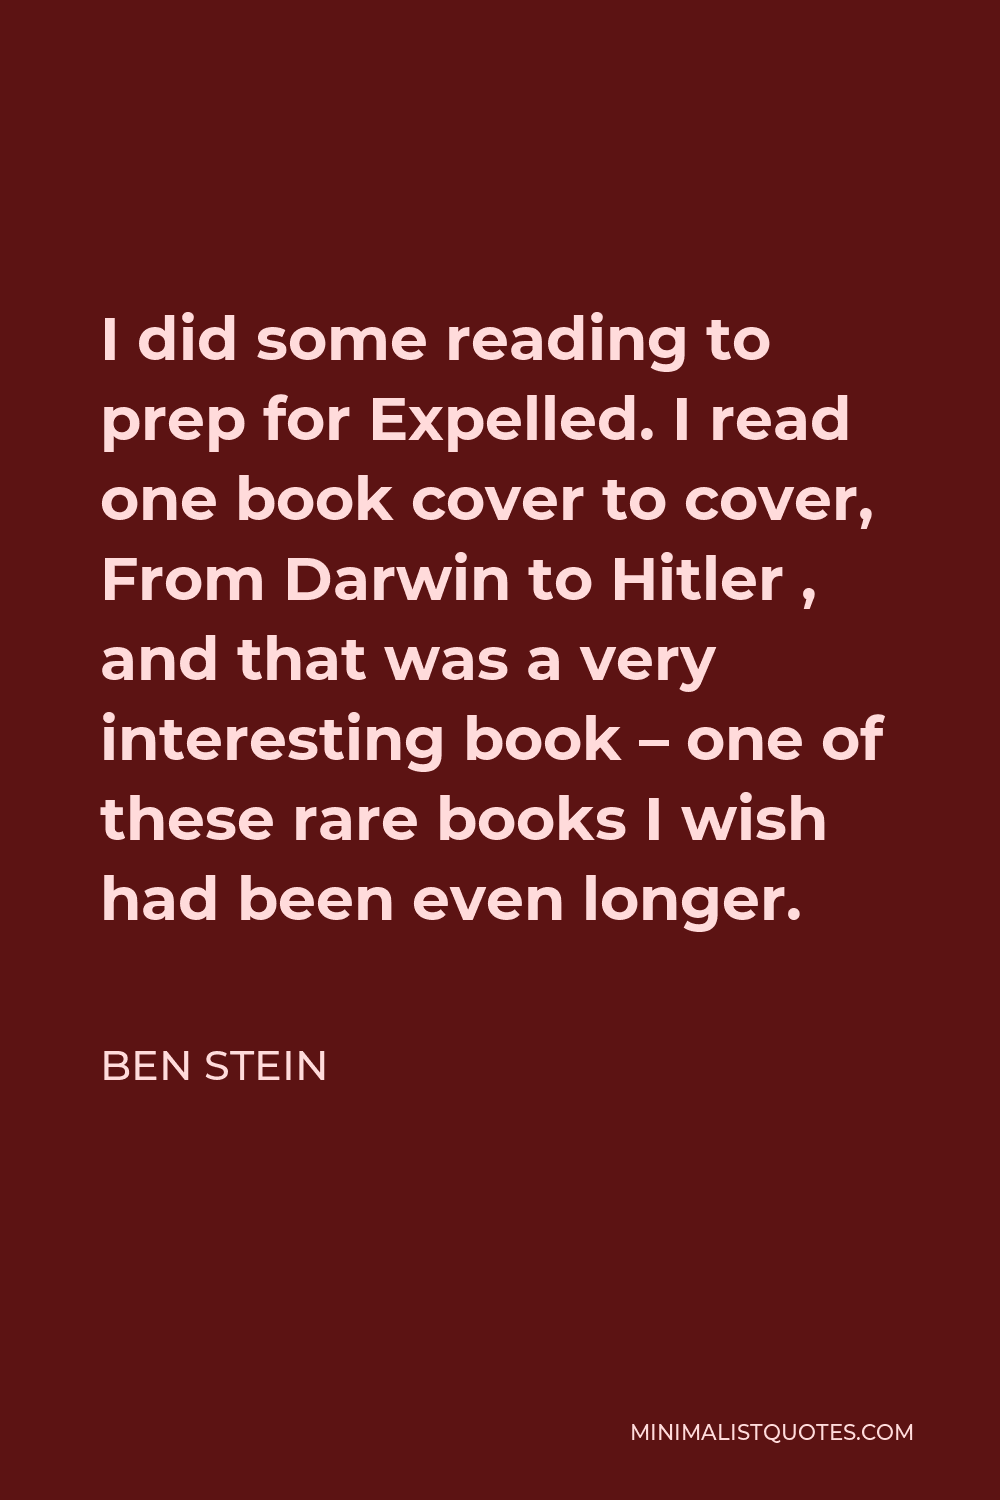 Ben Stein Quote - I did some reading to prep for Expelled. I read one book cover to cover, From Darwin to Hitler , and that was a very interesting book – one of these rare books I wish had been even longer.